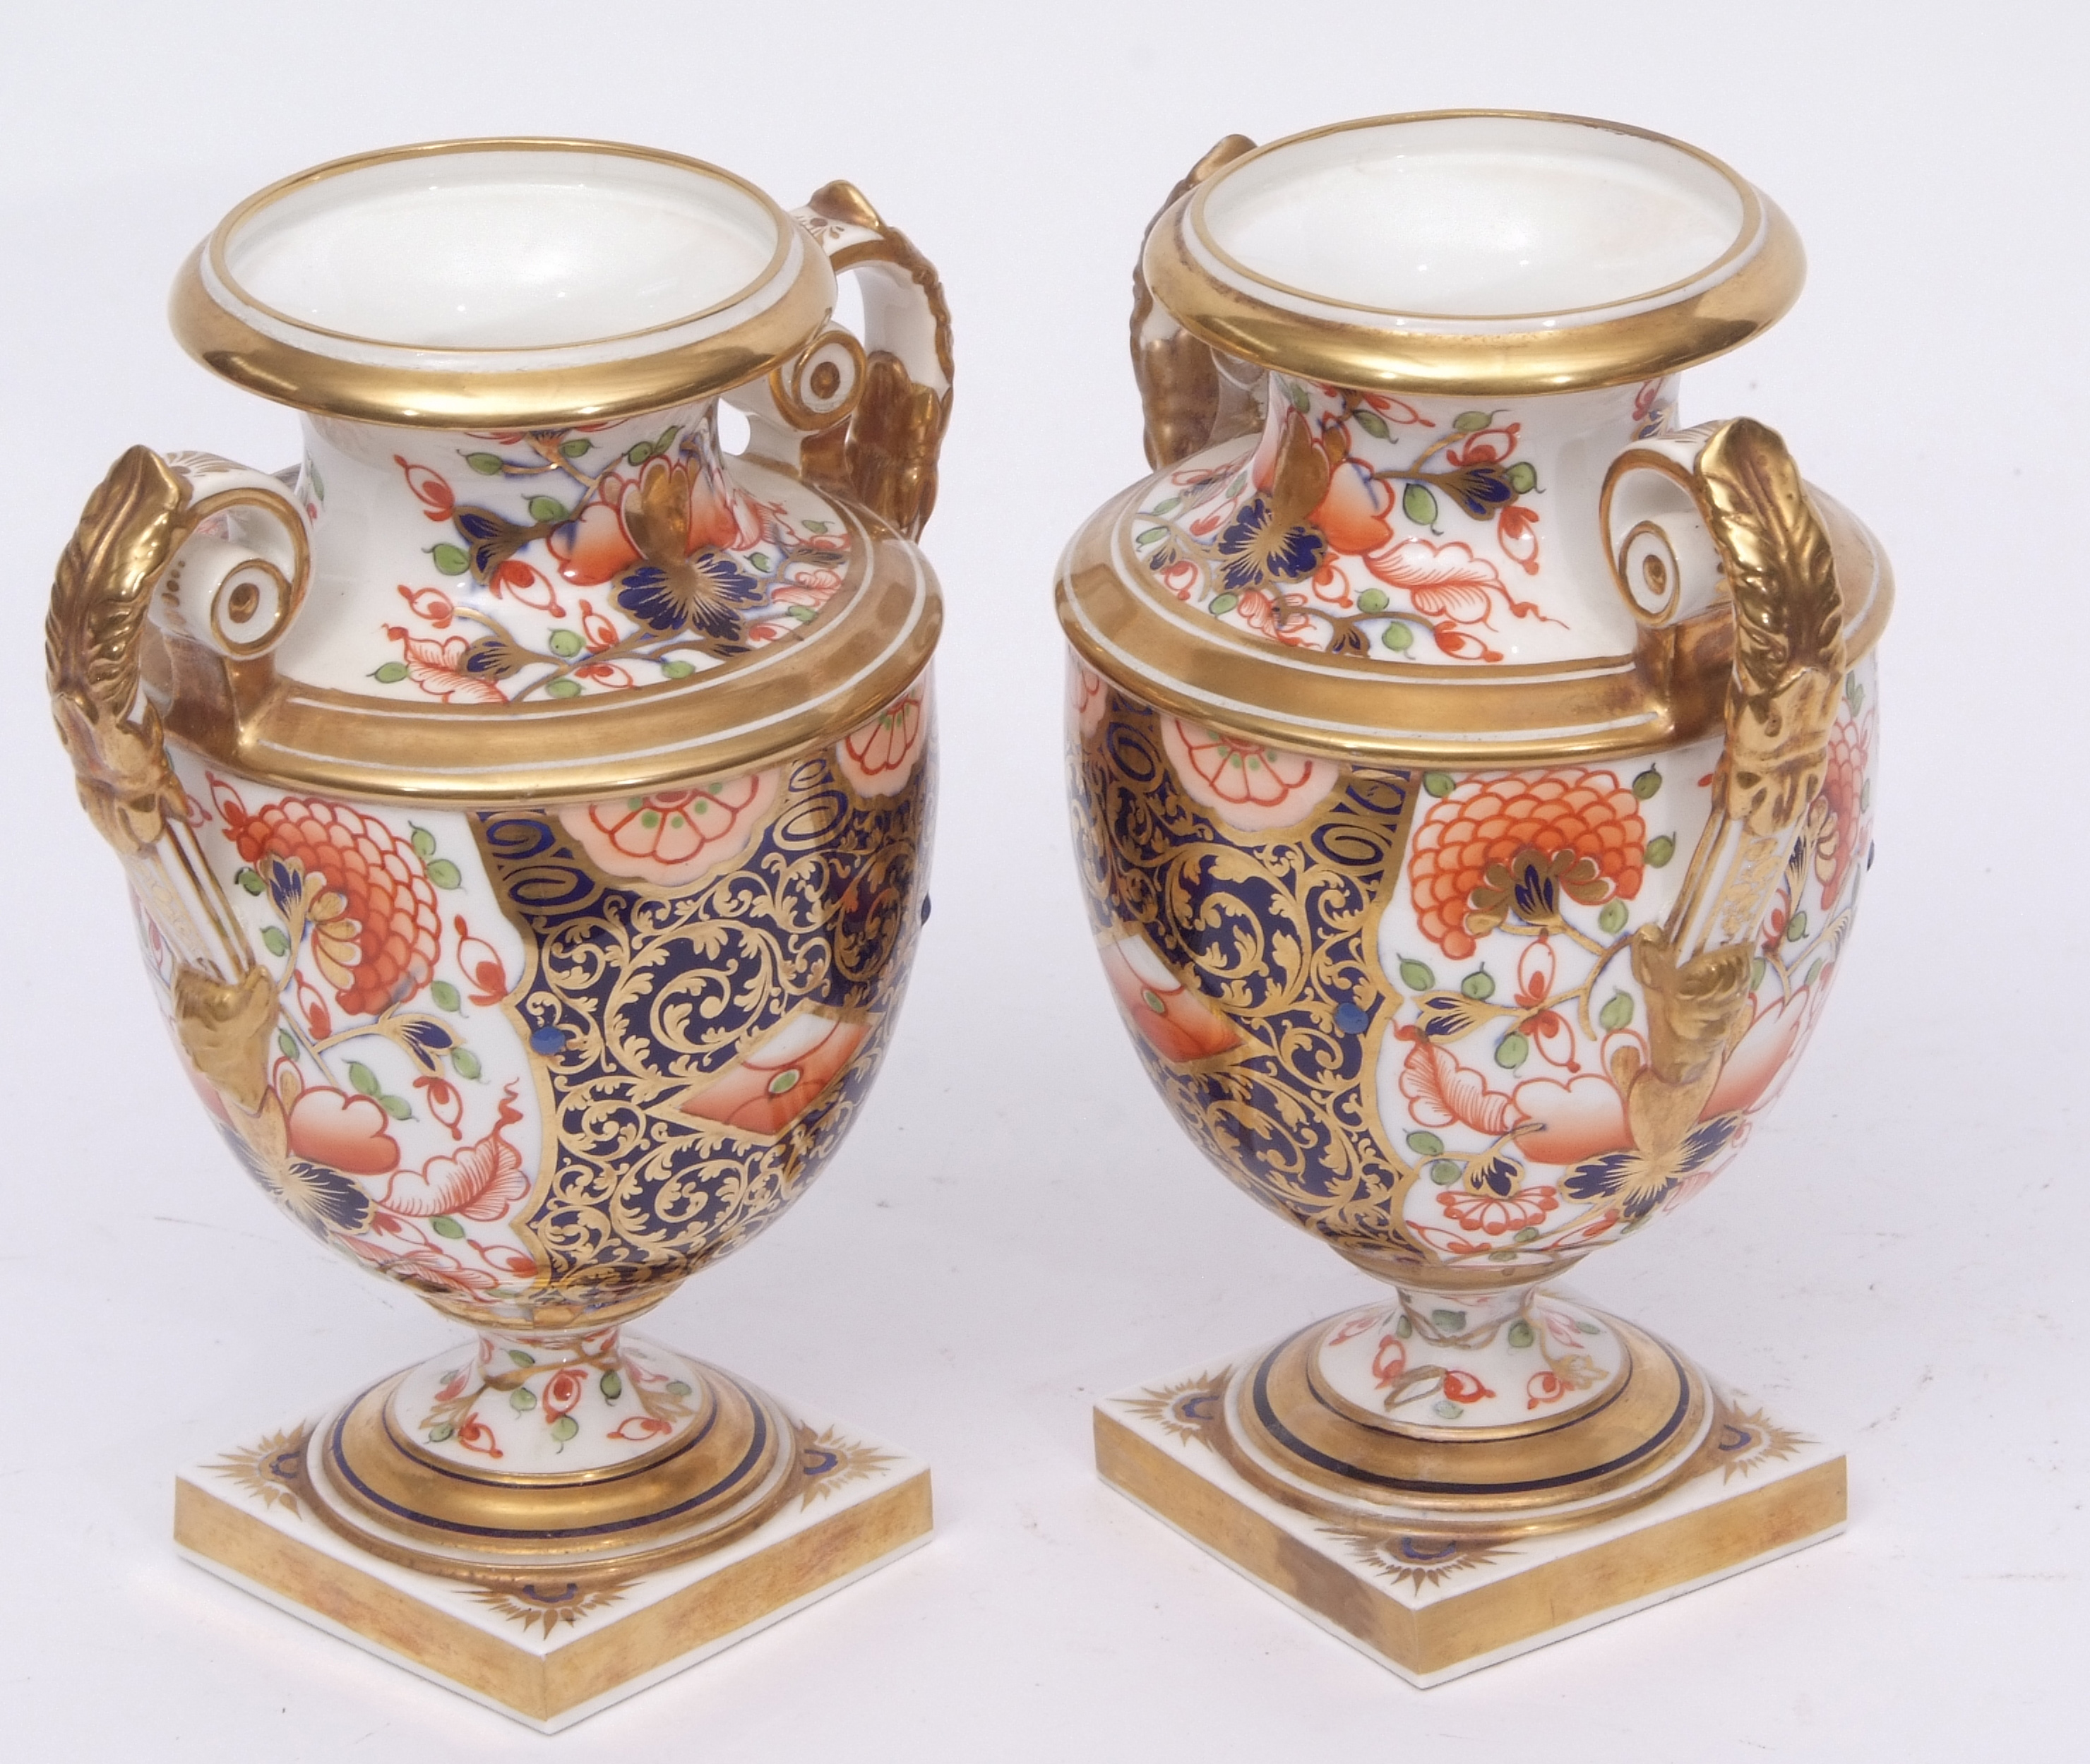 Pair of 19th century Derby (King Street) vases richly decorated in Imari style with gilt scroll - Image 2 of 3